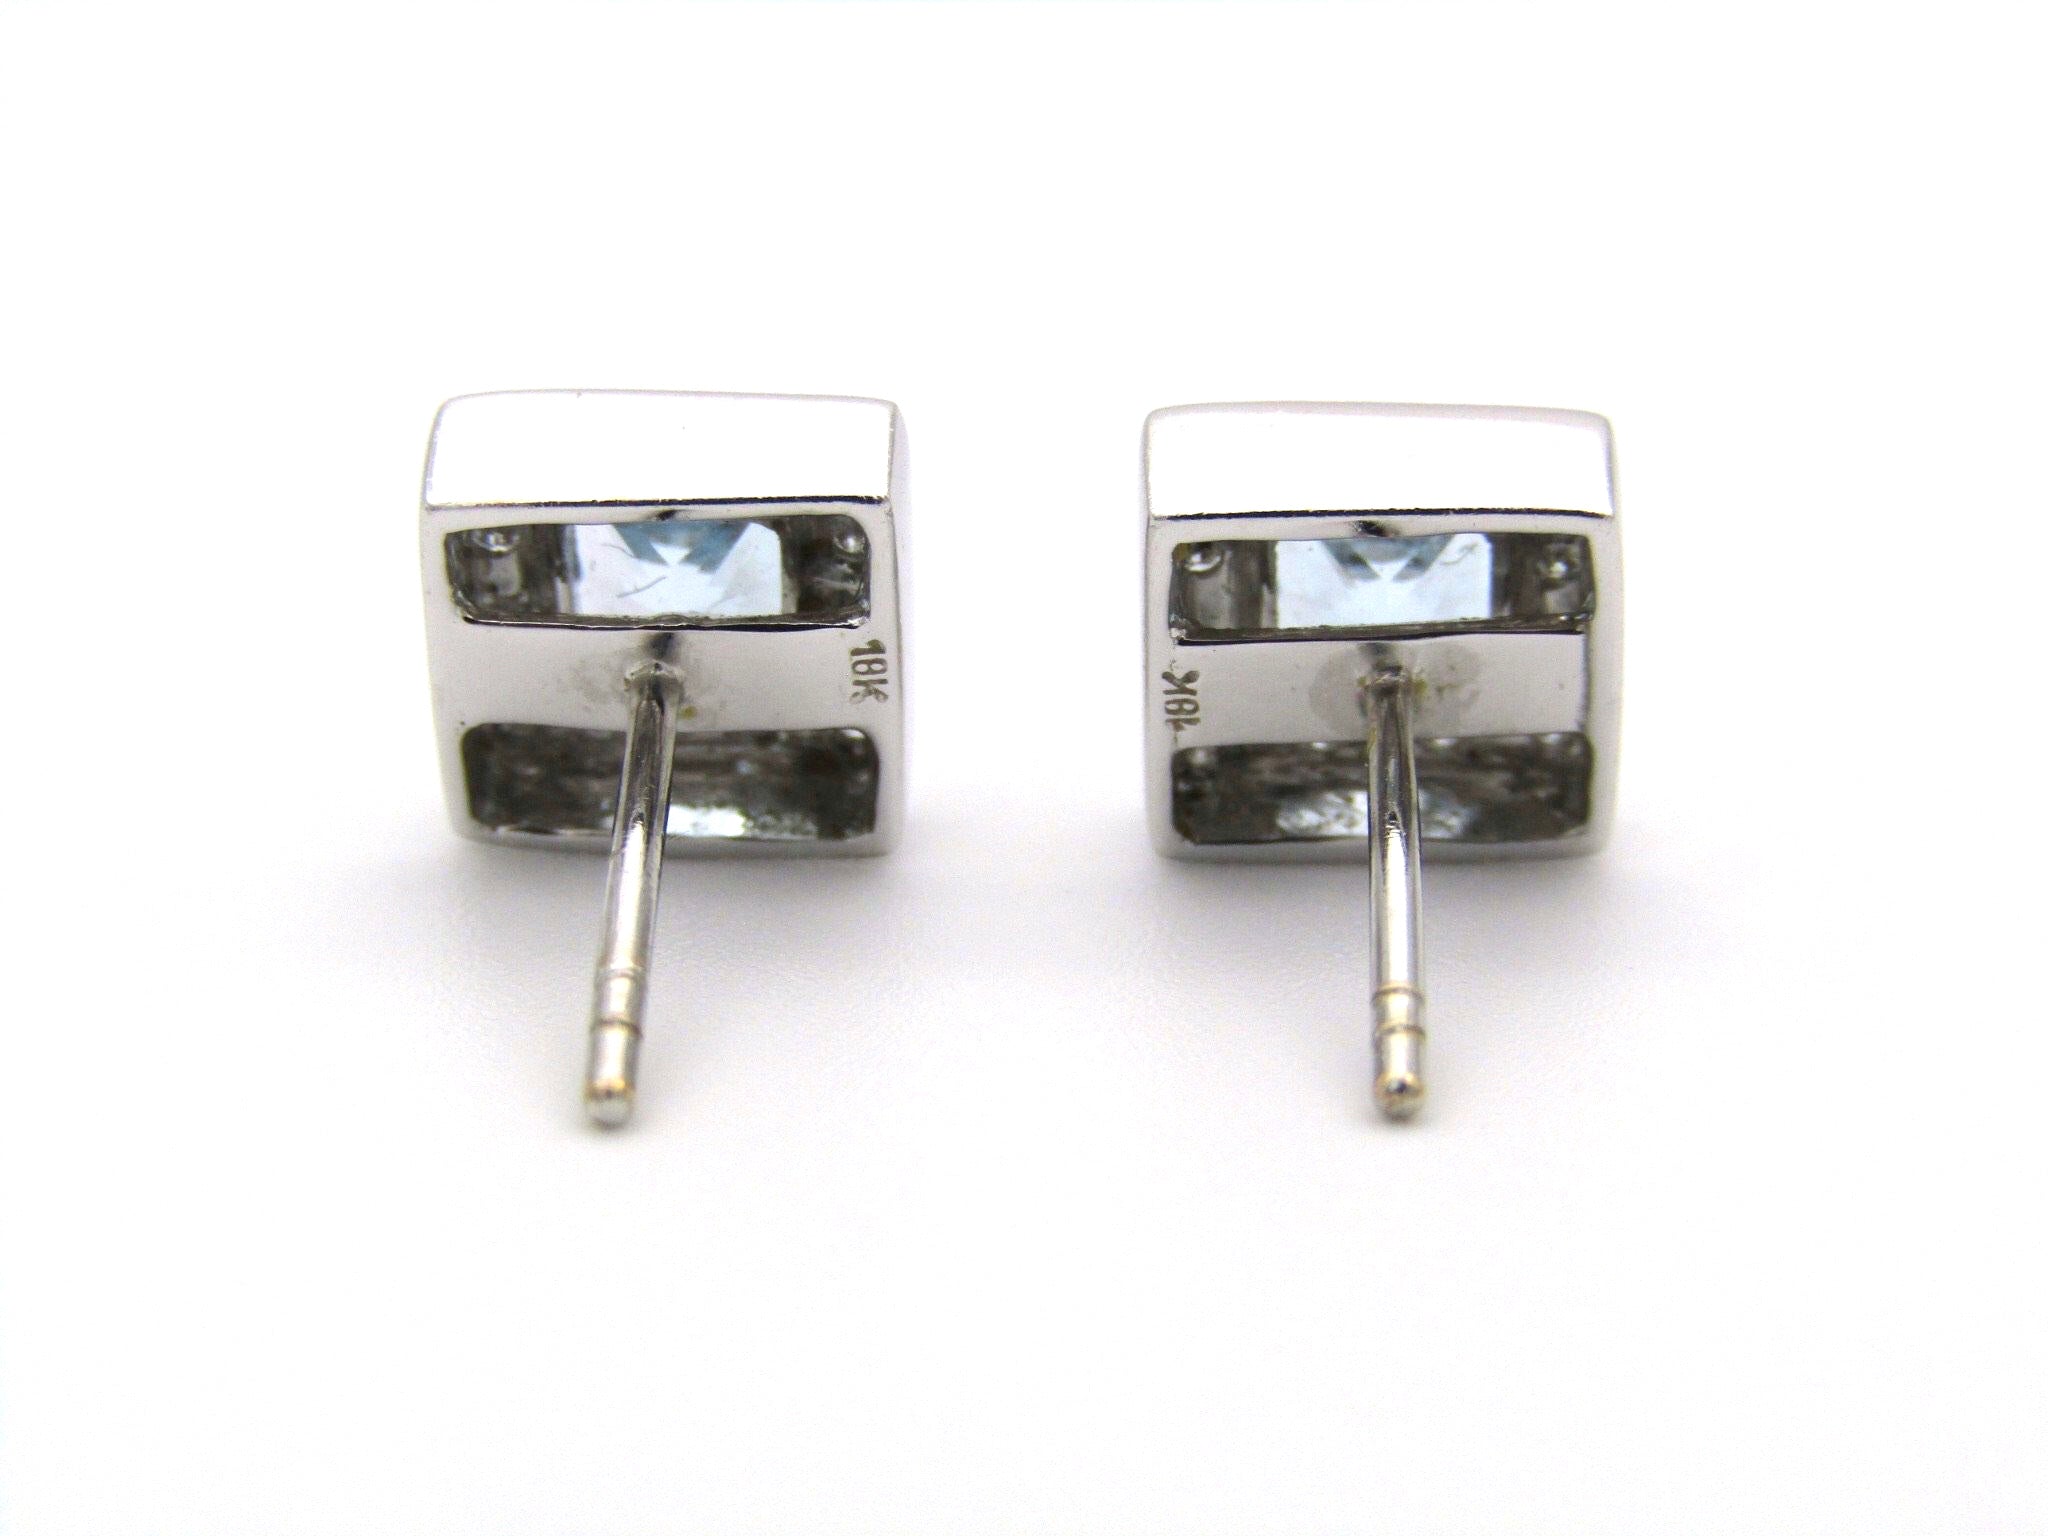 A pair of 18kt gold Blue Topaz and diamond earrings.